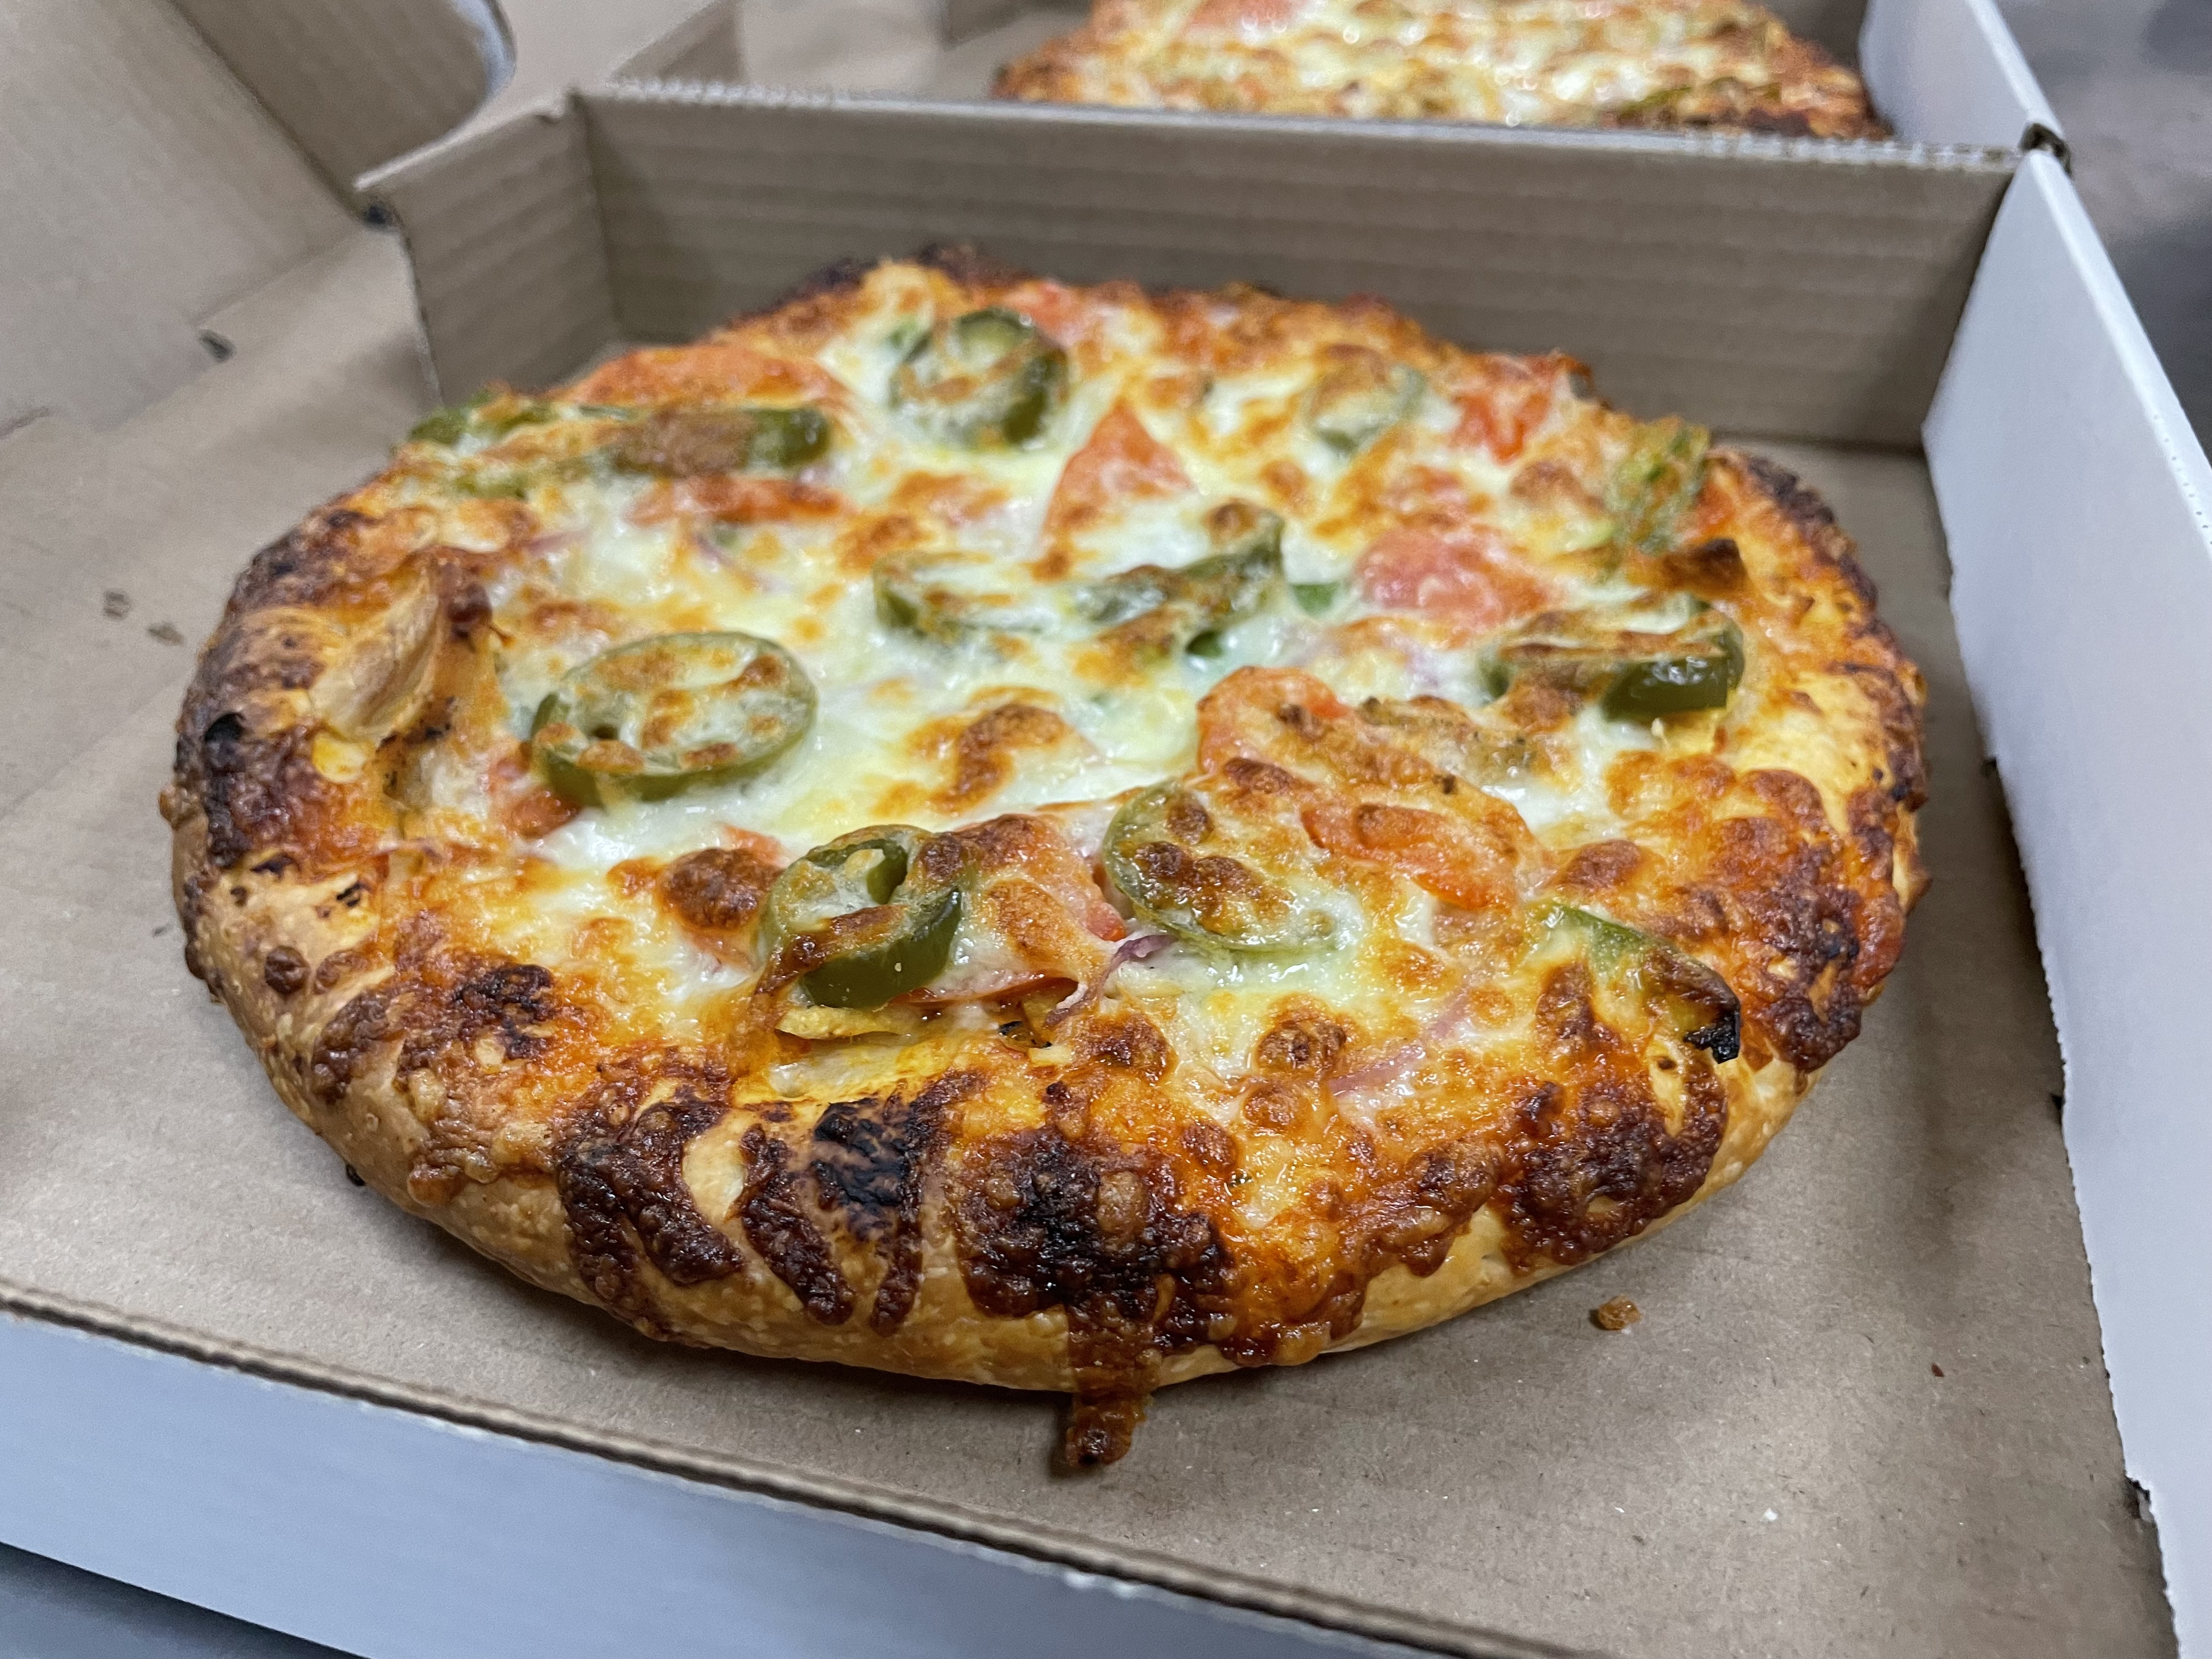 The jalapenos gave our pizza a nice kick, but the owner indicated they can modify the spice level according to custumers' taste